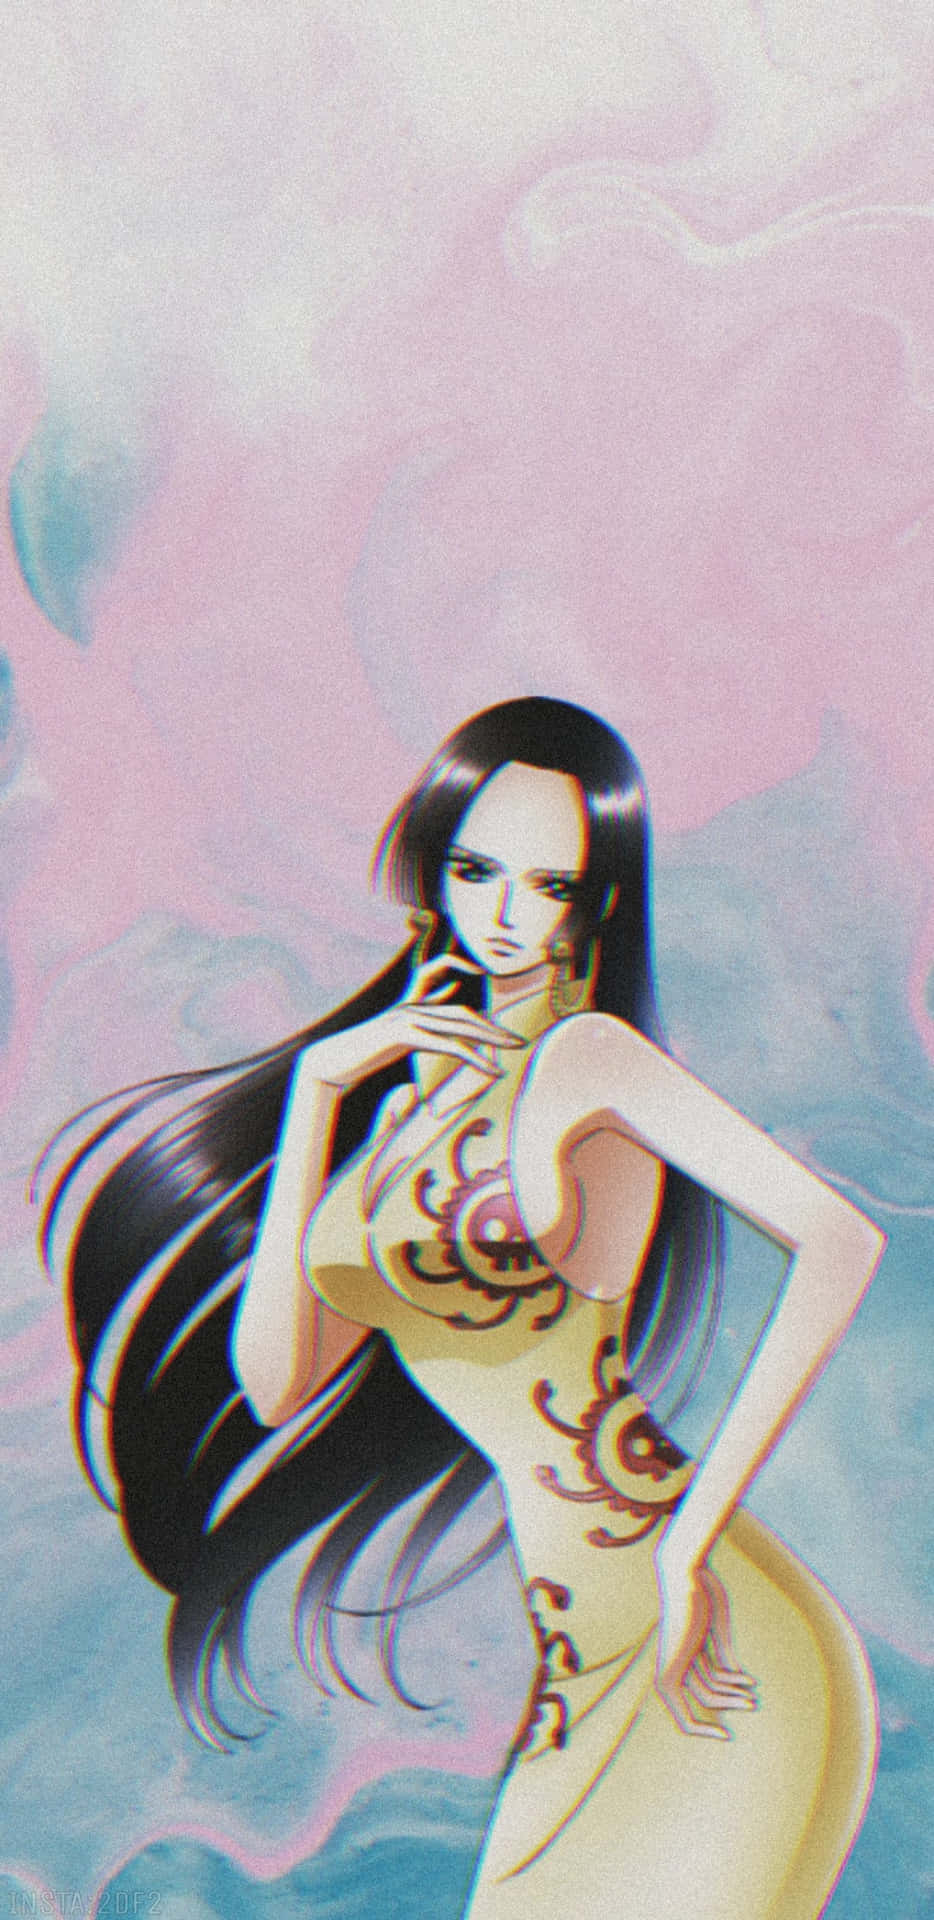 Nico Robin, an integral part of the Straw Hat Pirates Wallpaper